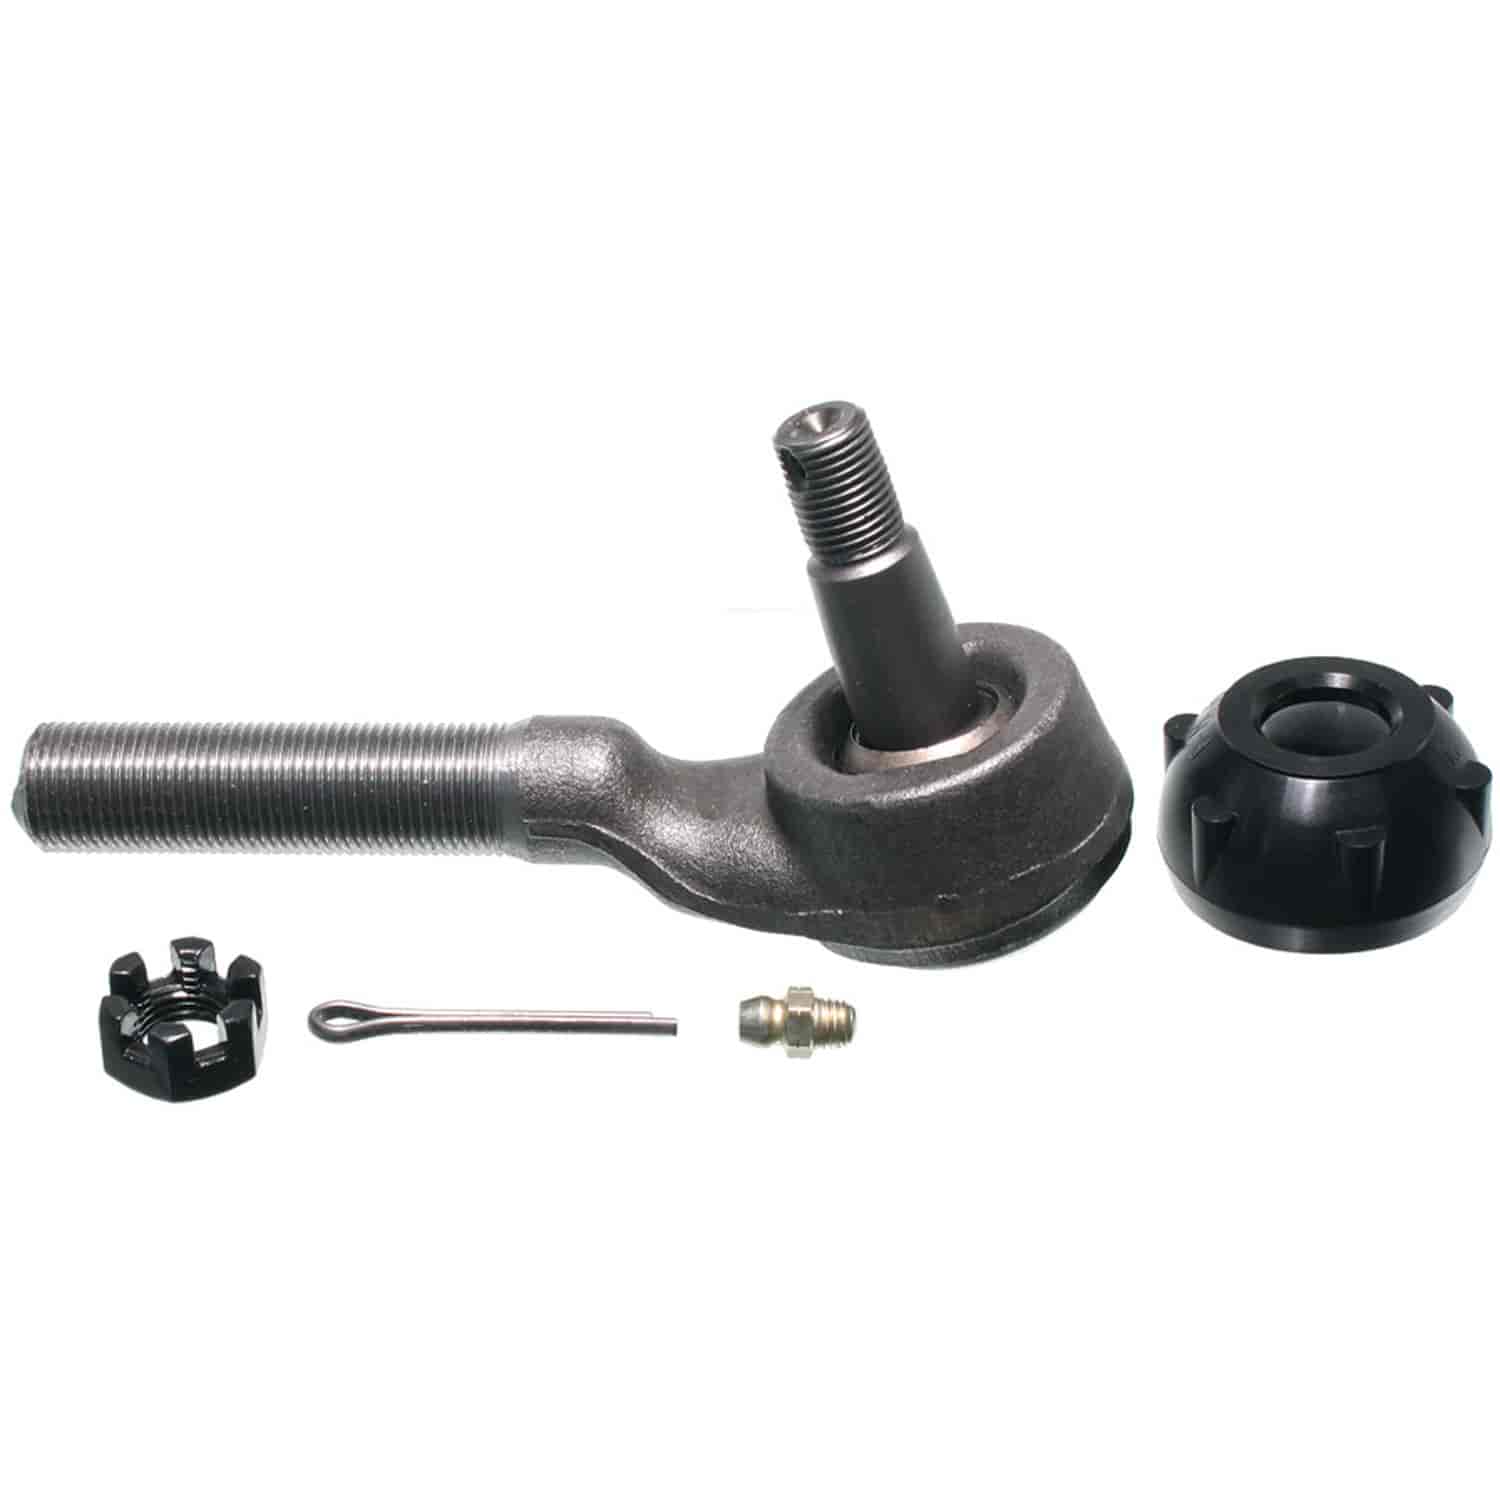 Tie Rod End Fits Select 1963-1964 Ford, Mercury Models